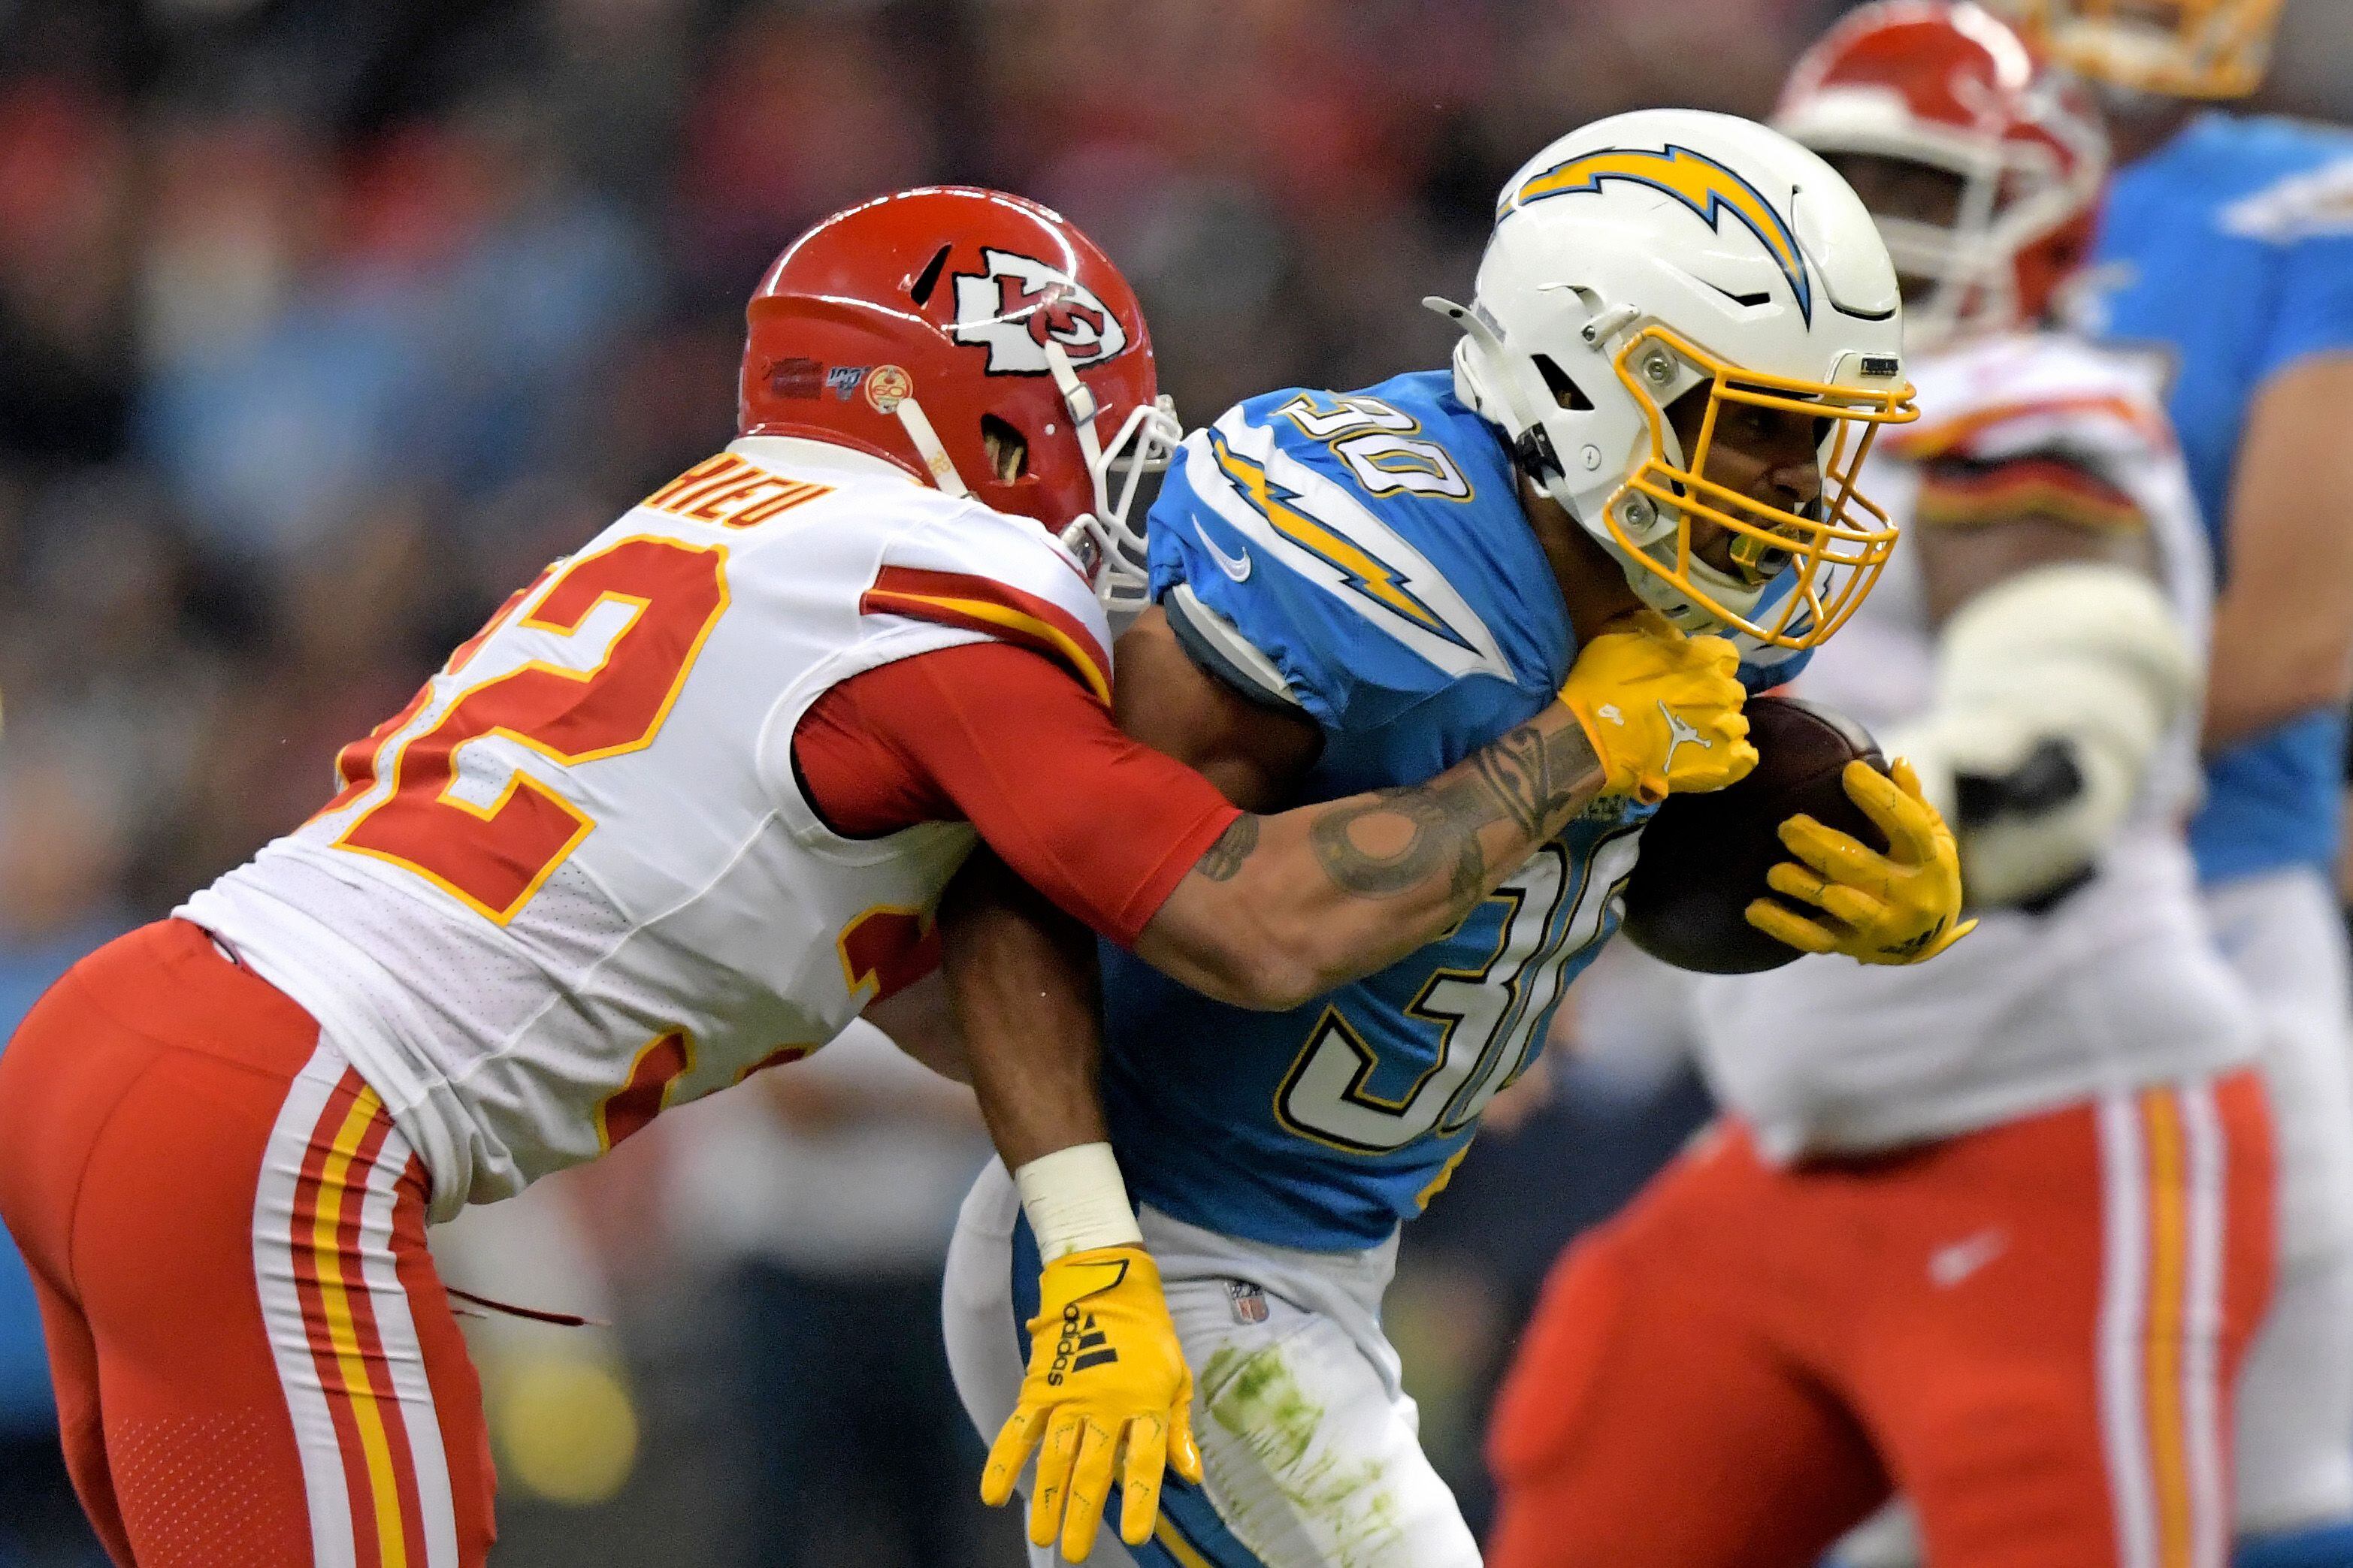 Nov 18, 2019; Mexico City, MEX; Los Angeles Chargers running back Austin Ekeler (30) is tackled by Kansas City Chiefs strong safety Tyrann Mathieu (32) in the first quarter during an NFL International Series game at Estadio Azteca. Mandatory Credit: Kirby Lee-USA TODAY Sports